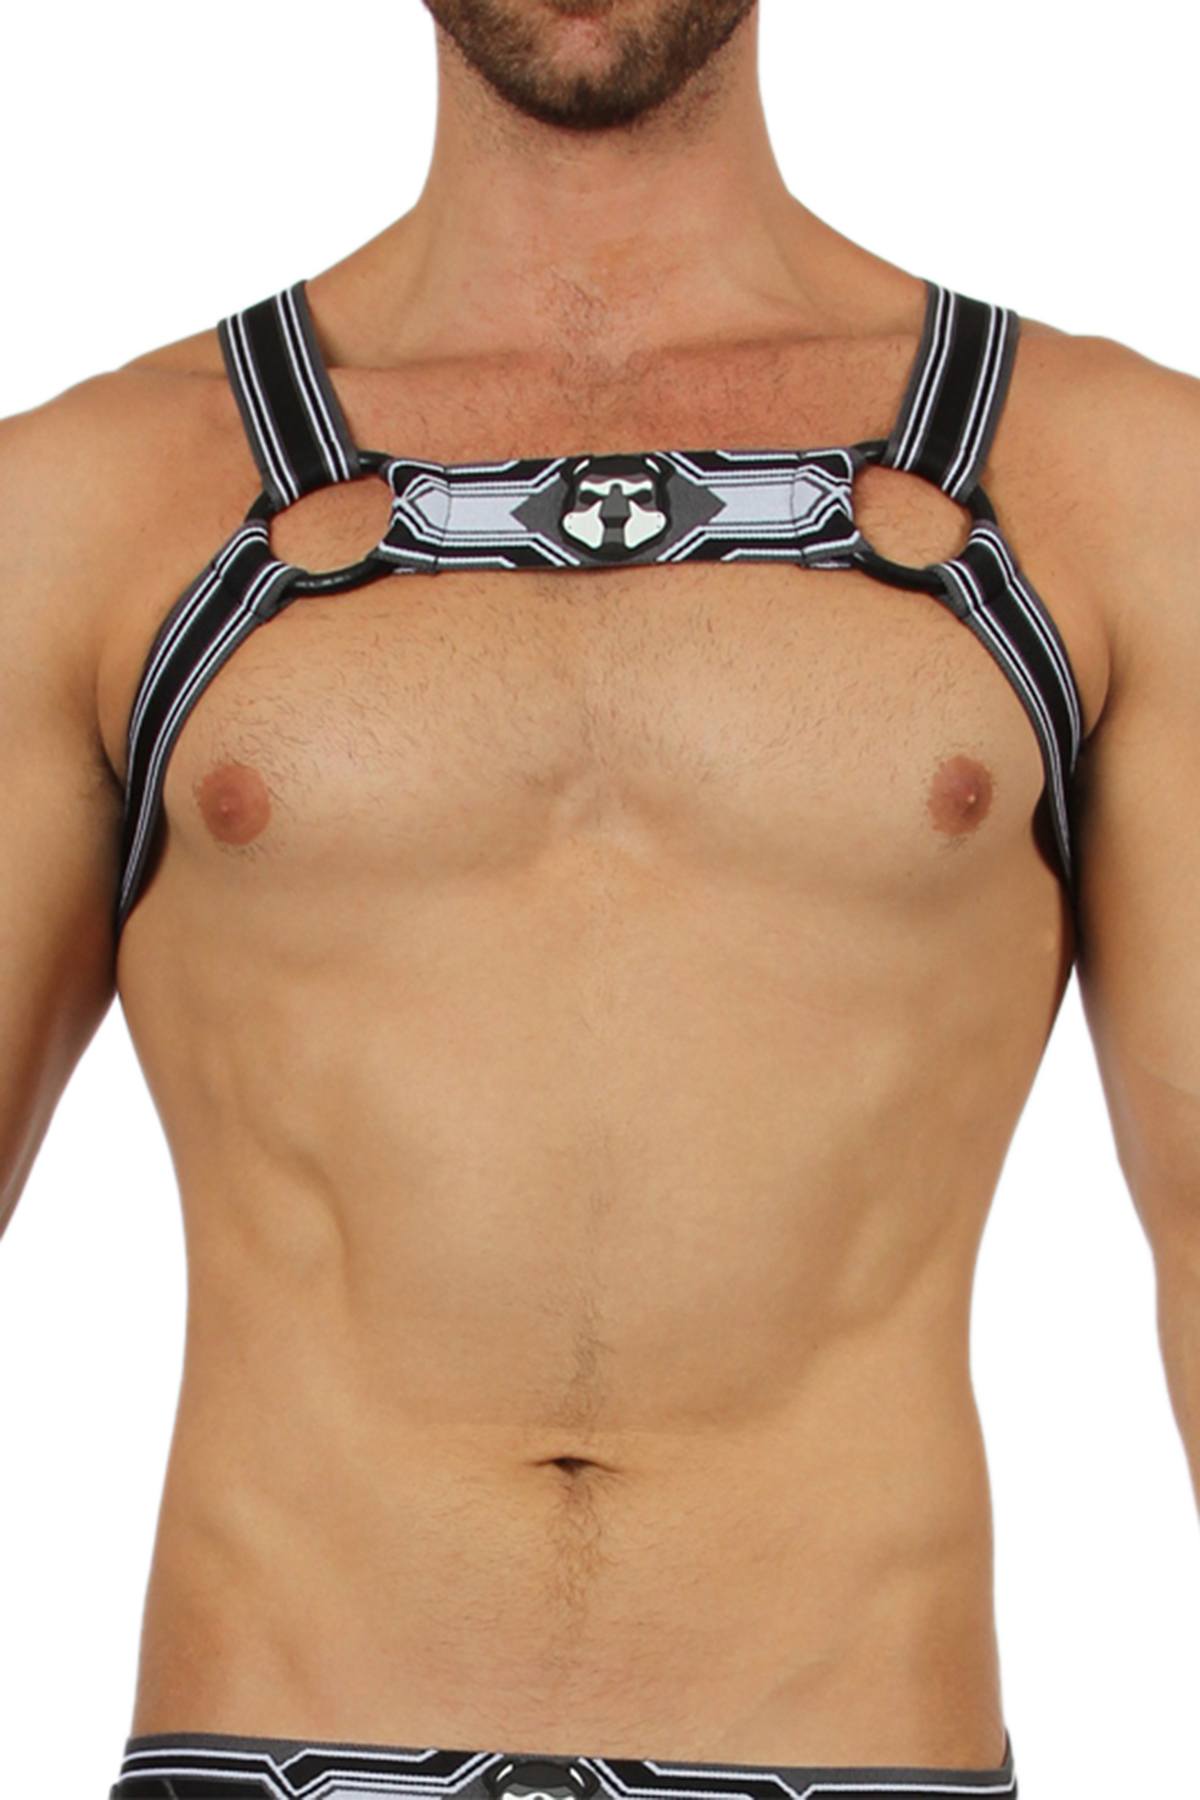 CellBlock 13 White Kennel Club Harness